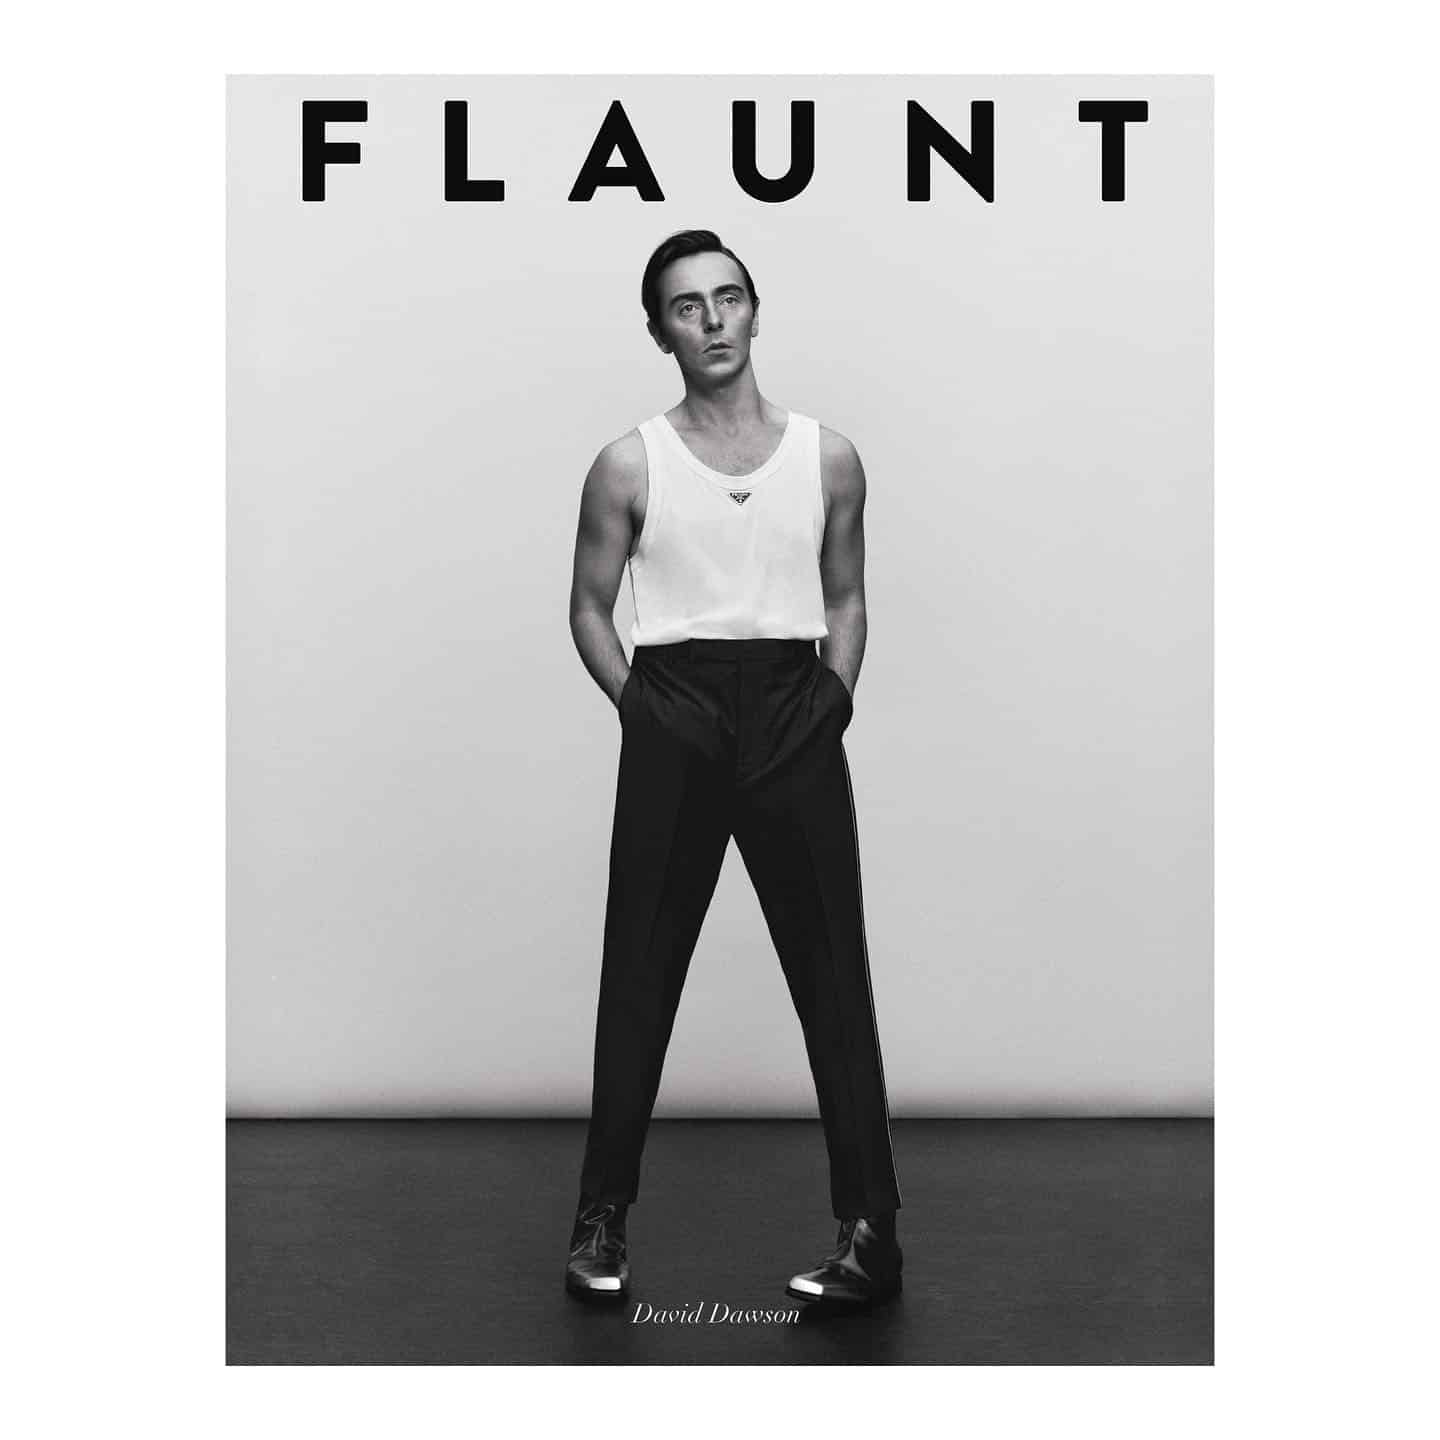 @mrdrdawson on the cover of @flauntmagazine discussing his role in My Policeman. Available to watch on Amazon, globally now 
.
.
.
📸 @_isaacanthony 
 @yahgirlmeggy 
‍♂️ @ekagrooming 
✍️ @maddieeschulz 
 @casalomatoronto 
.
.
.